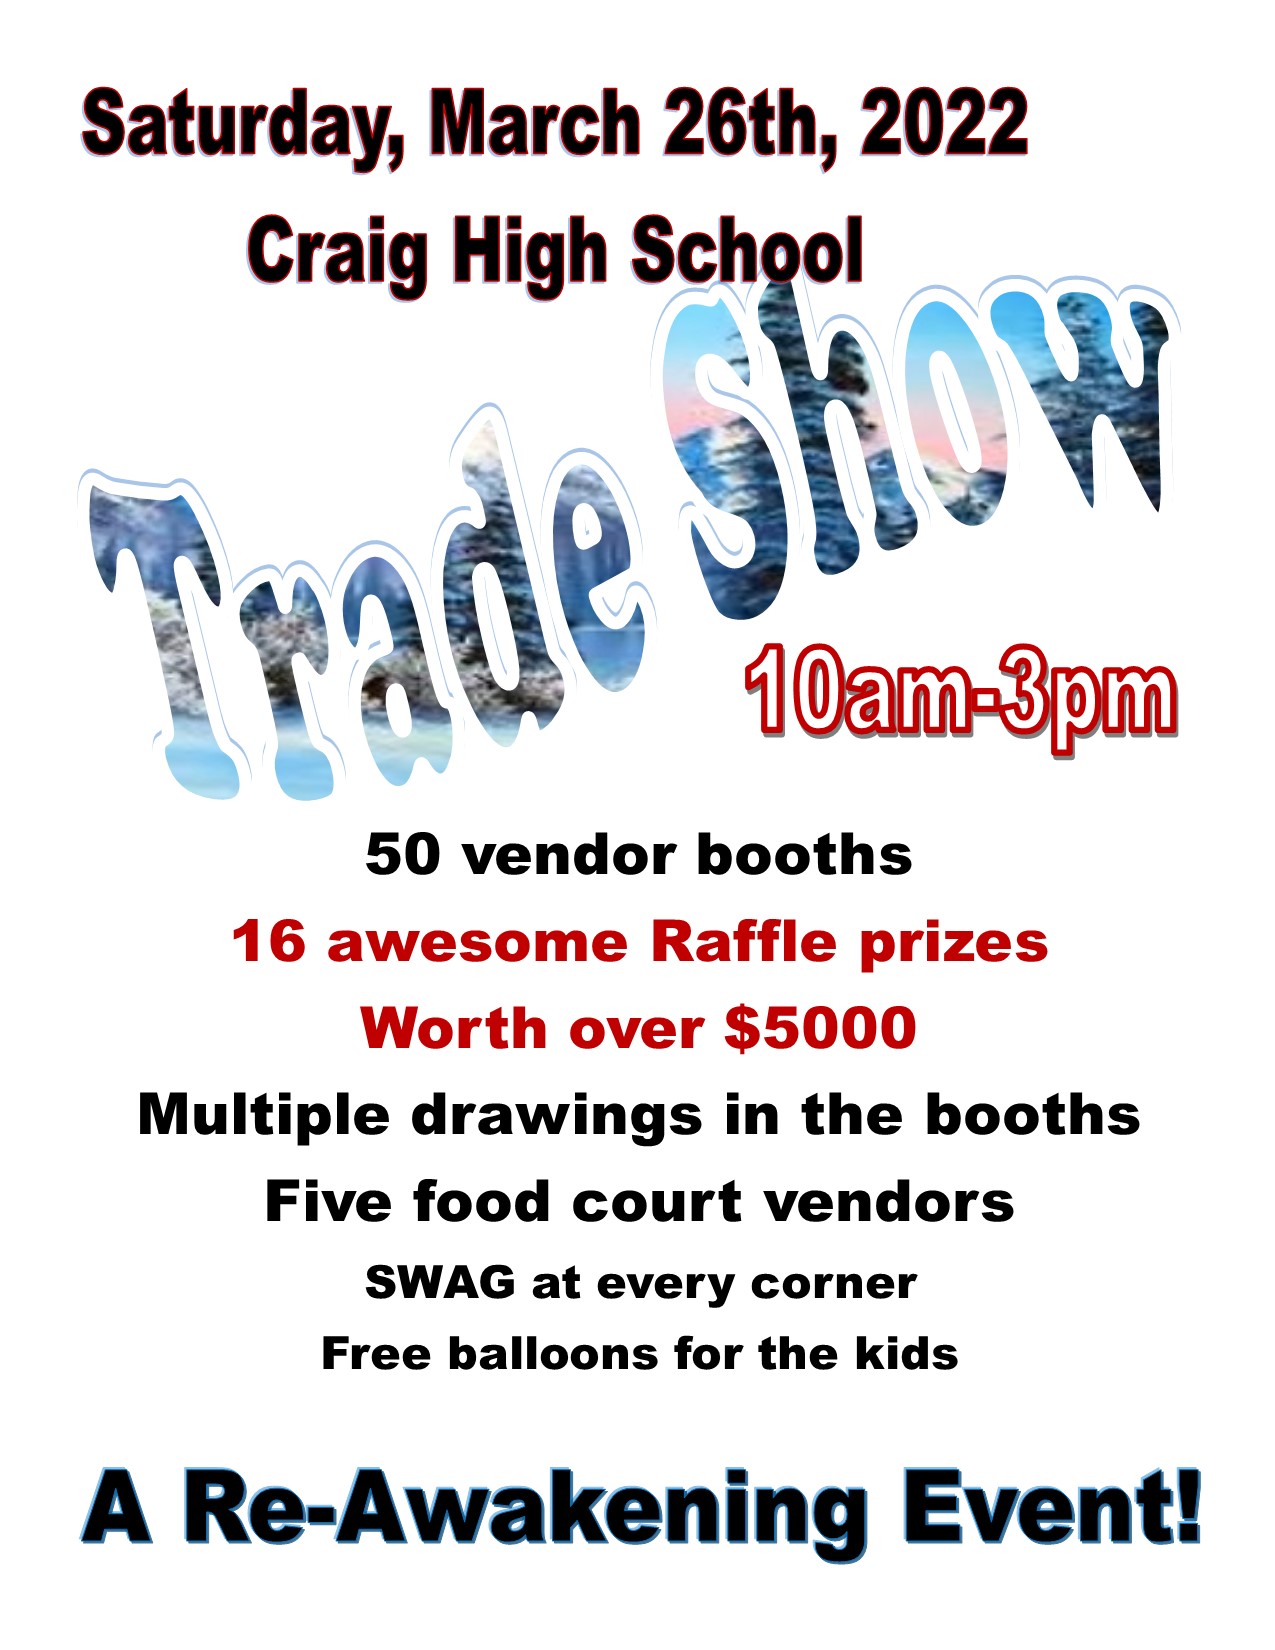 2022 Business Expo and Trade Show March 26th